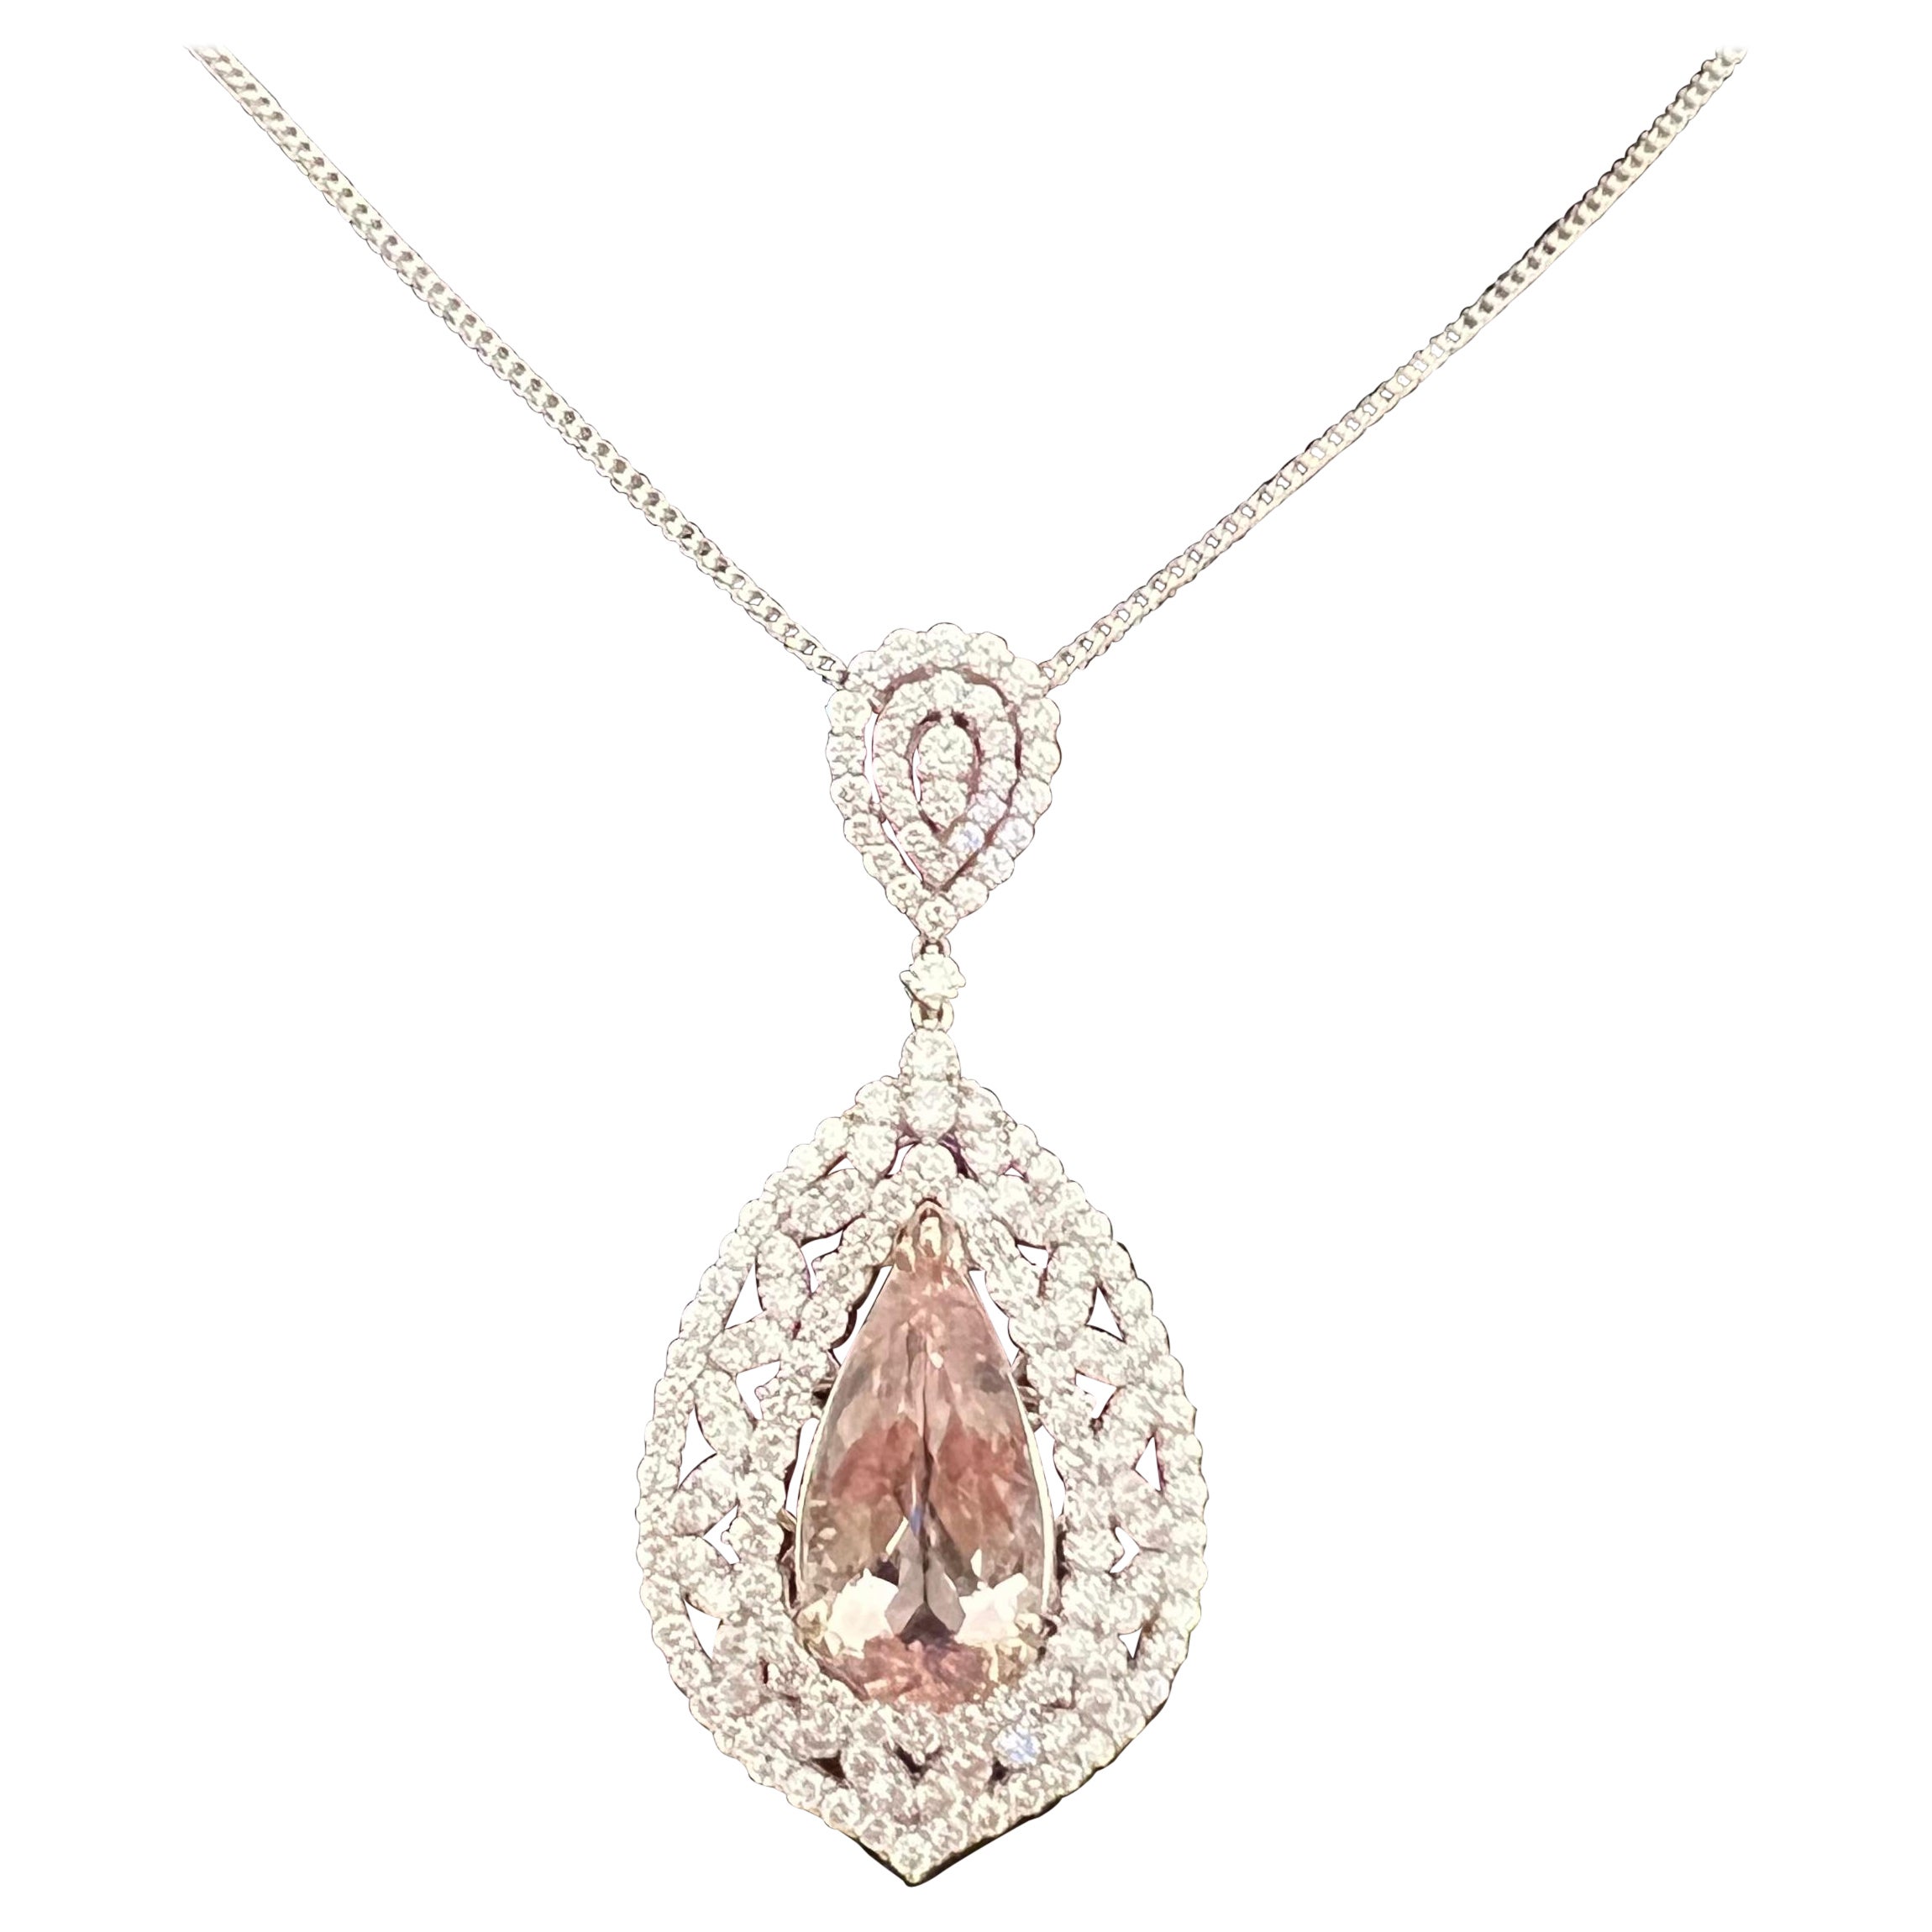 Exquisite 17 Carat Pink Morganite and Diamond Pendant Necklace in 18K White Gold For Sale